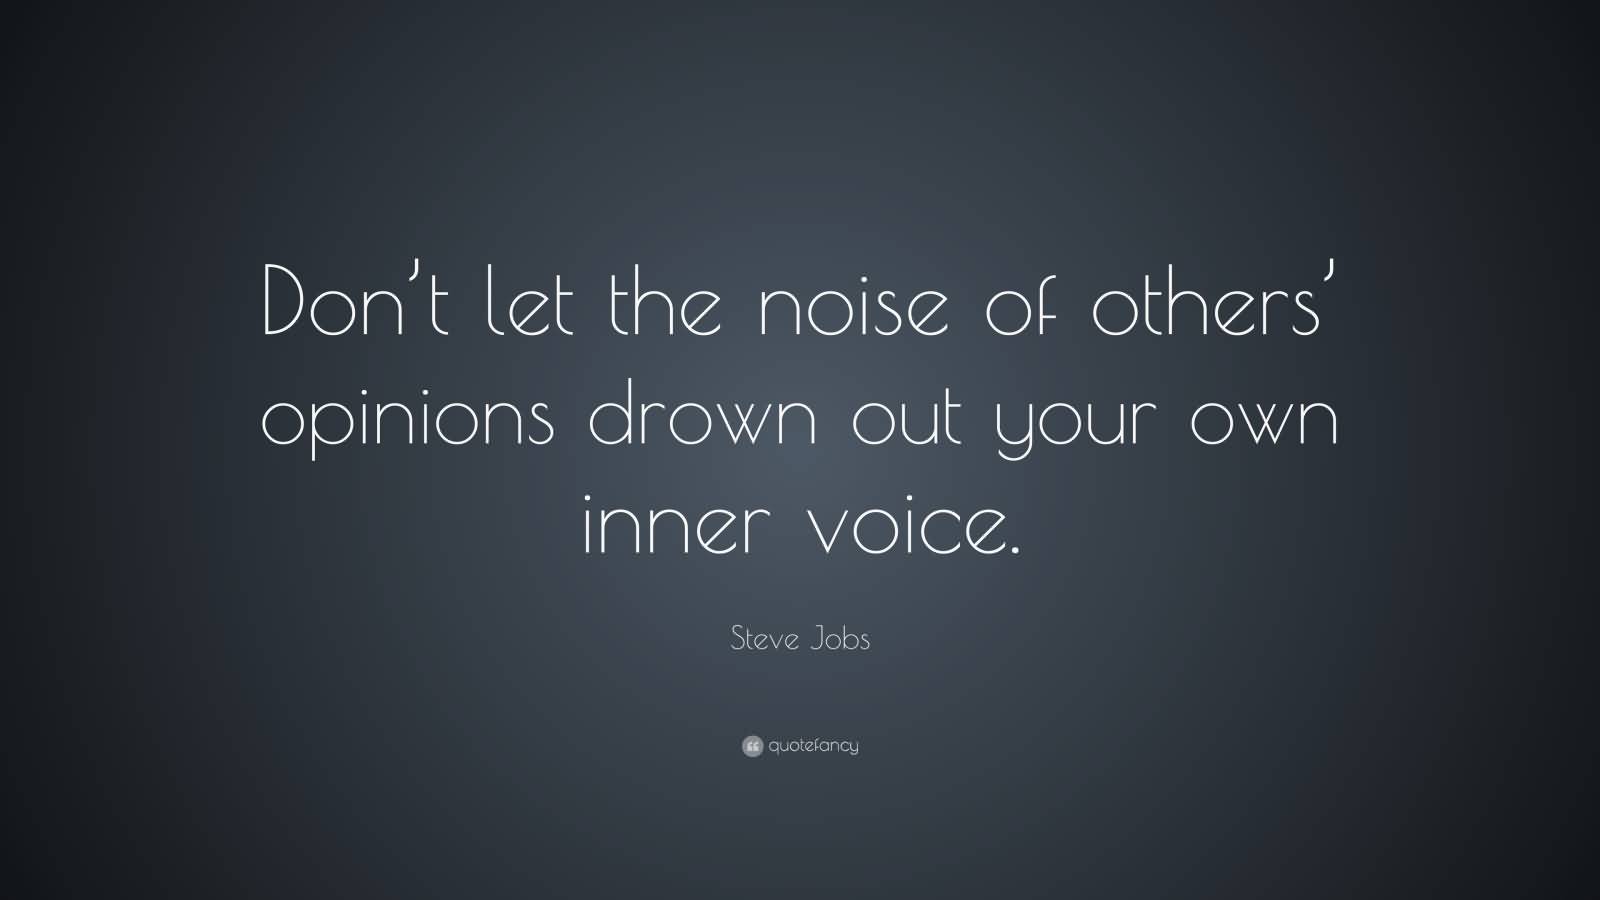 Don’t let the noise of others’ opinions drown out your own inner voice. Steve Jobs